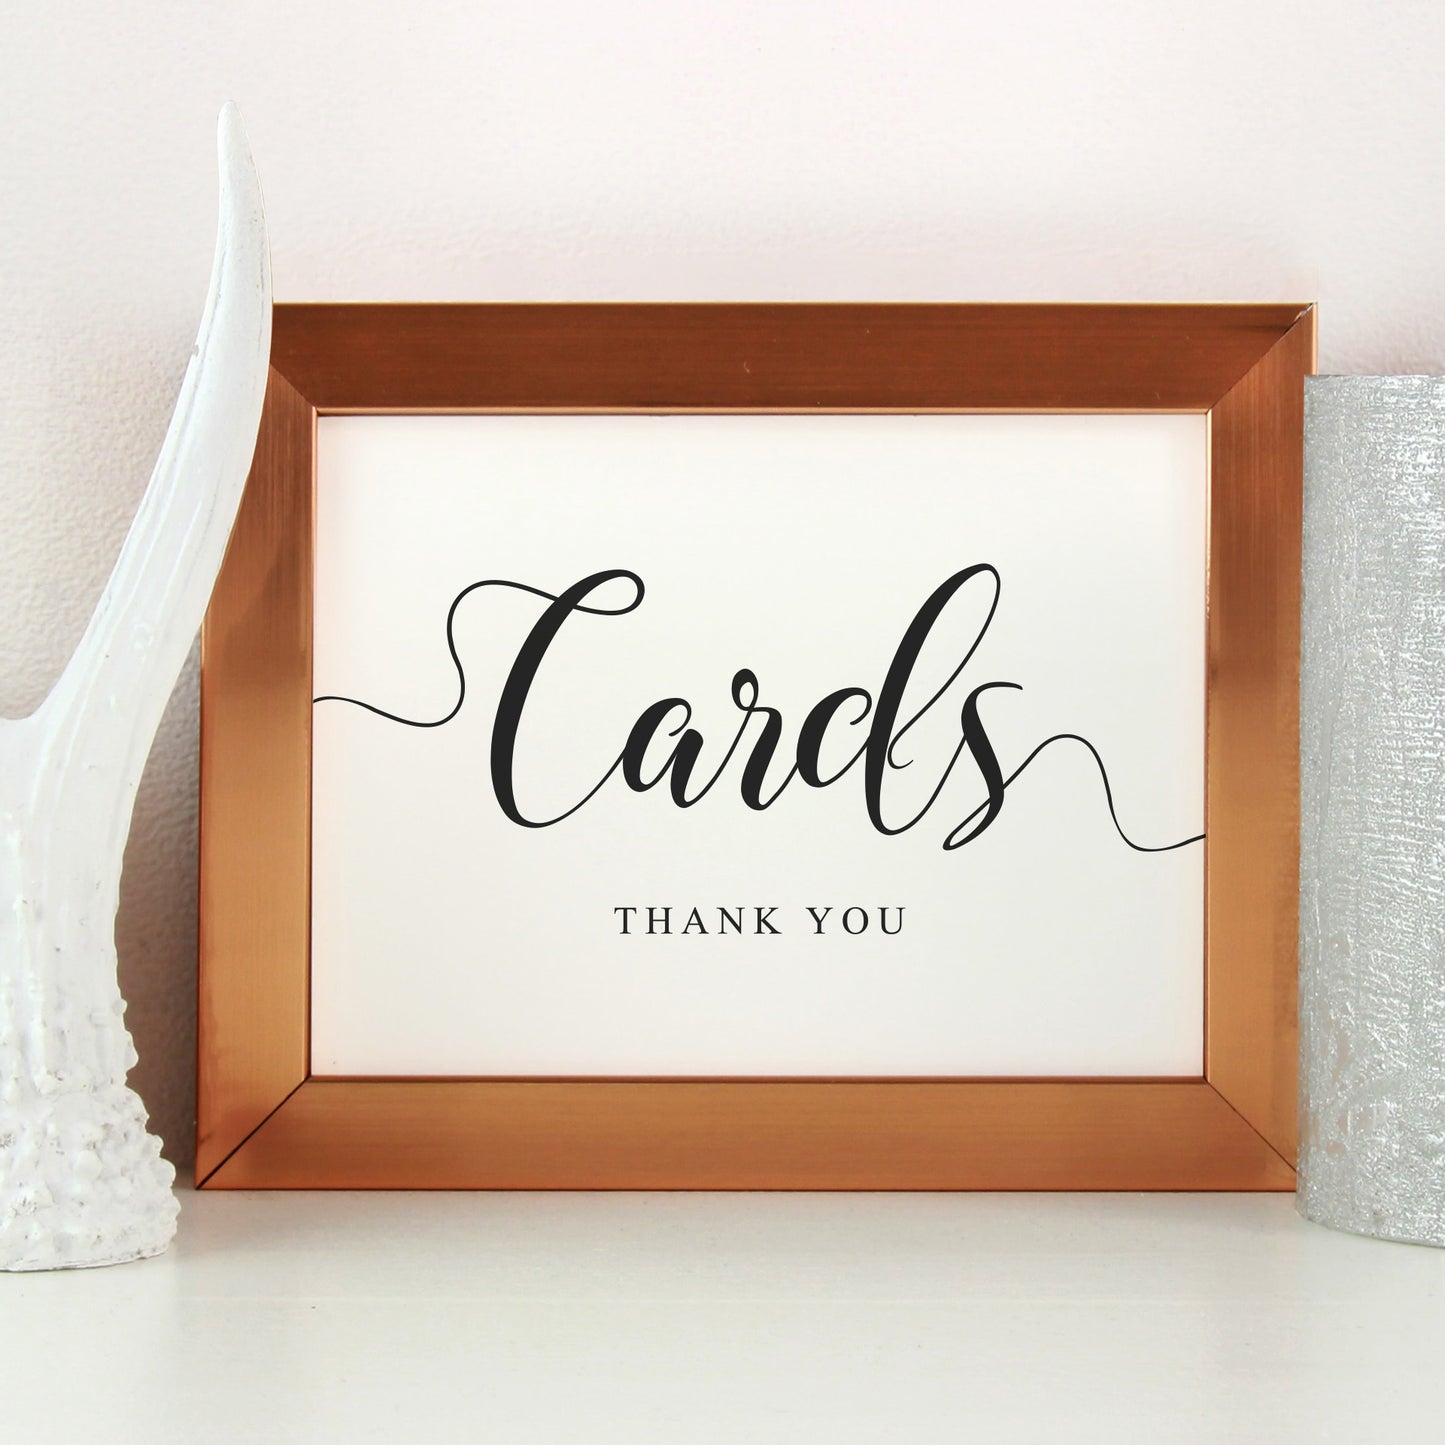 Cards sign on table at wedding reception